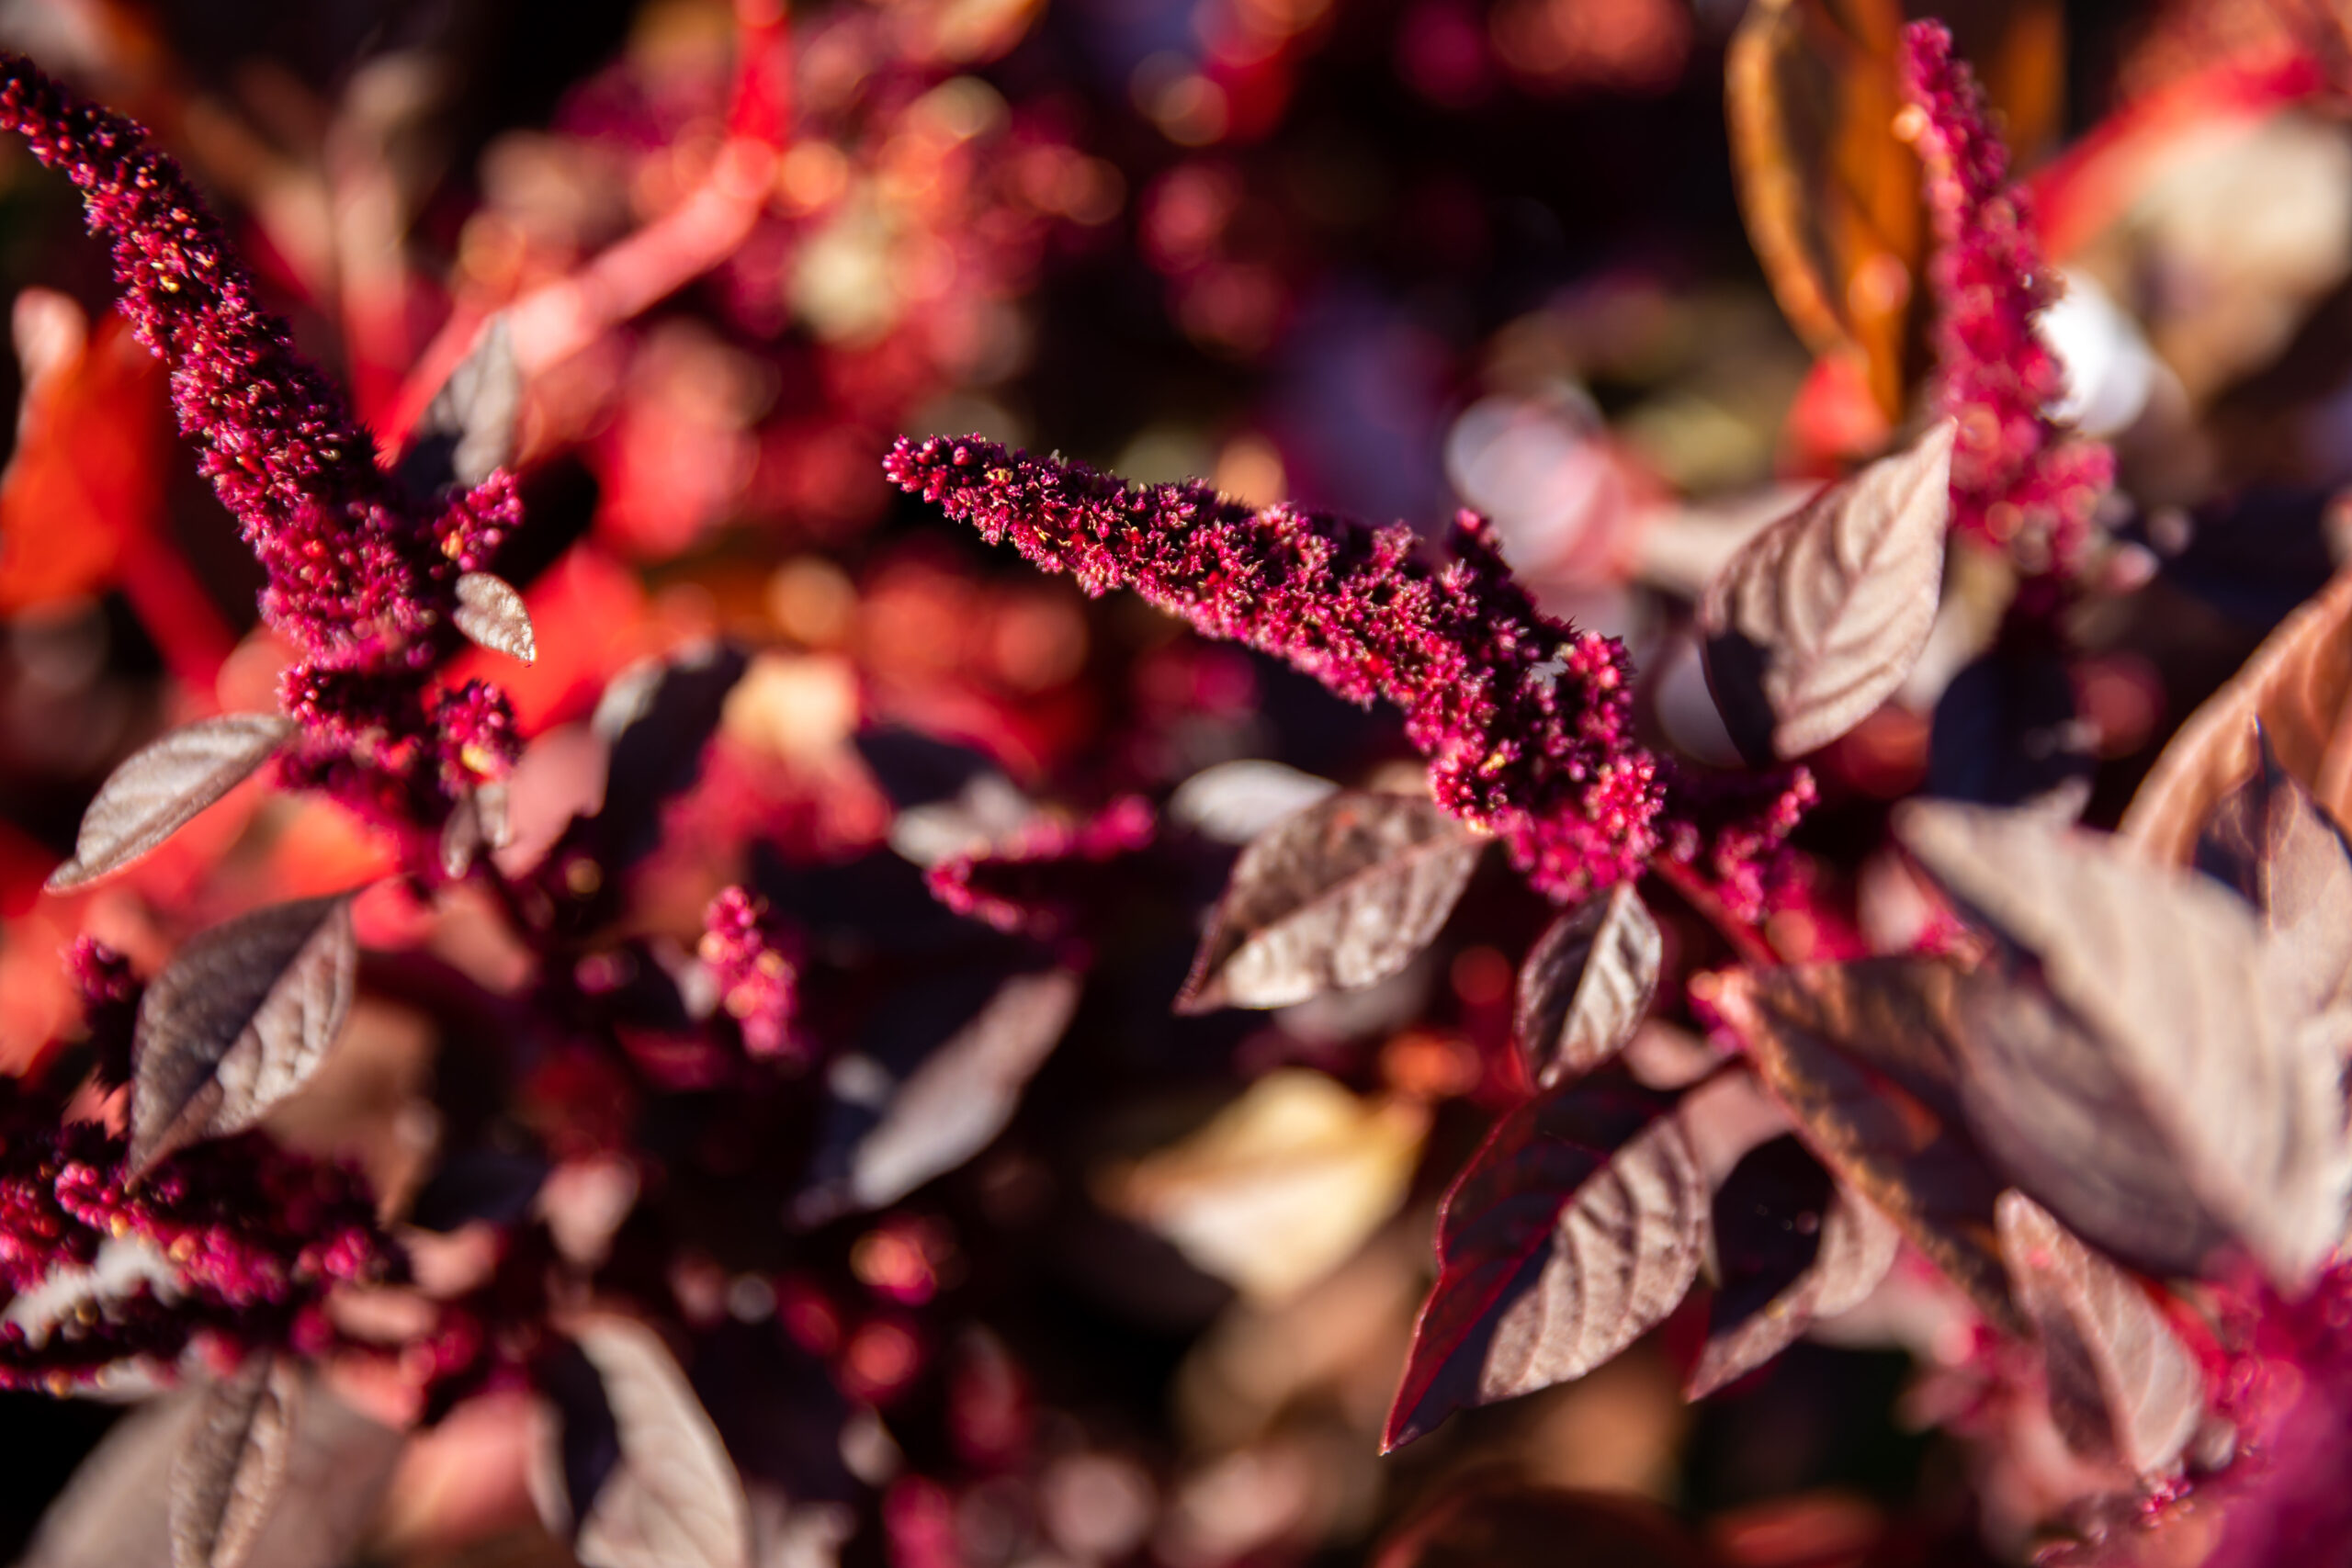 A fall foliage picture of red amaranth